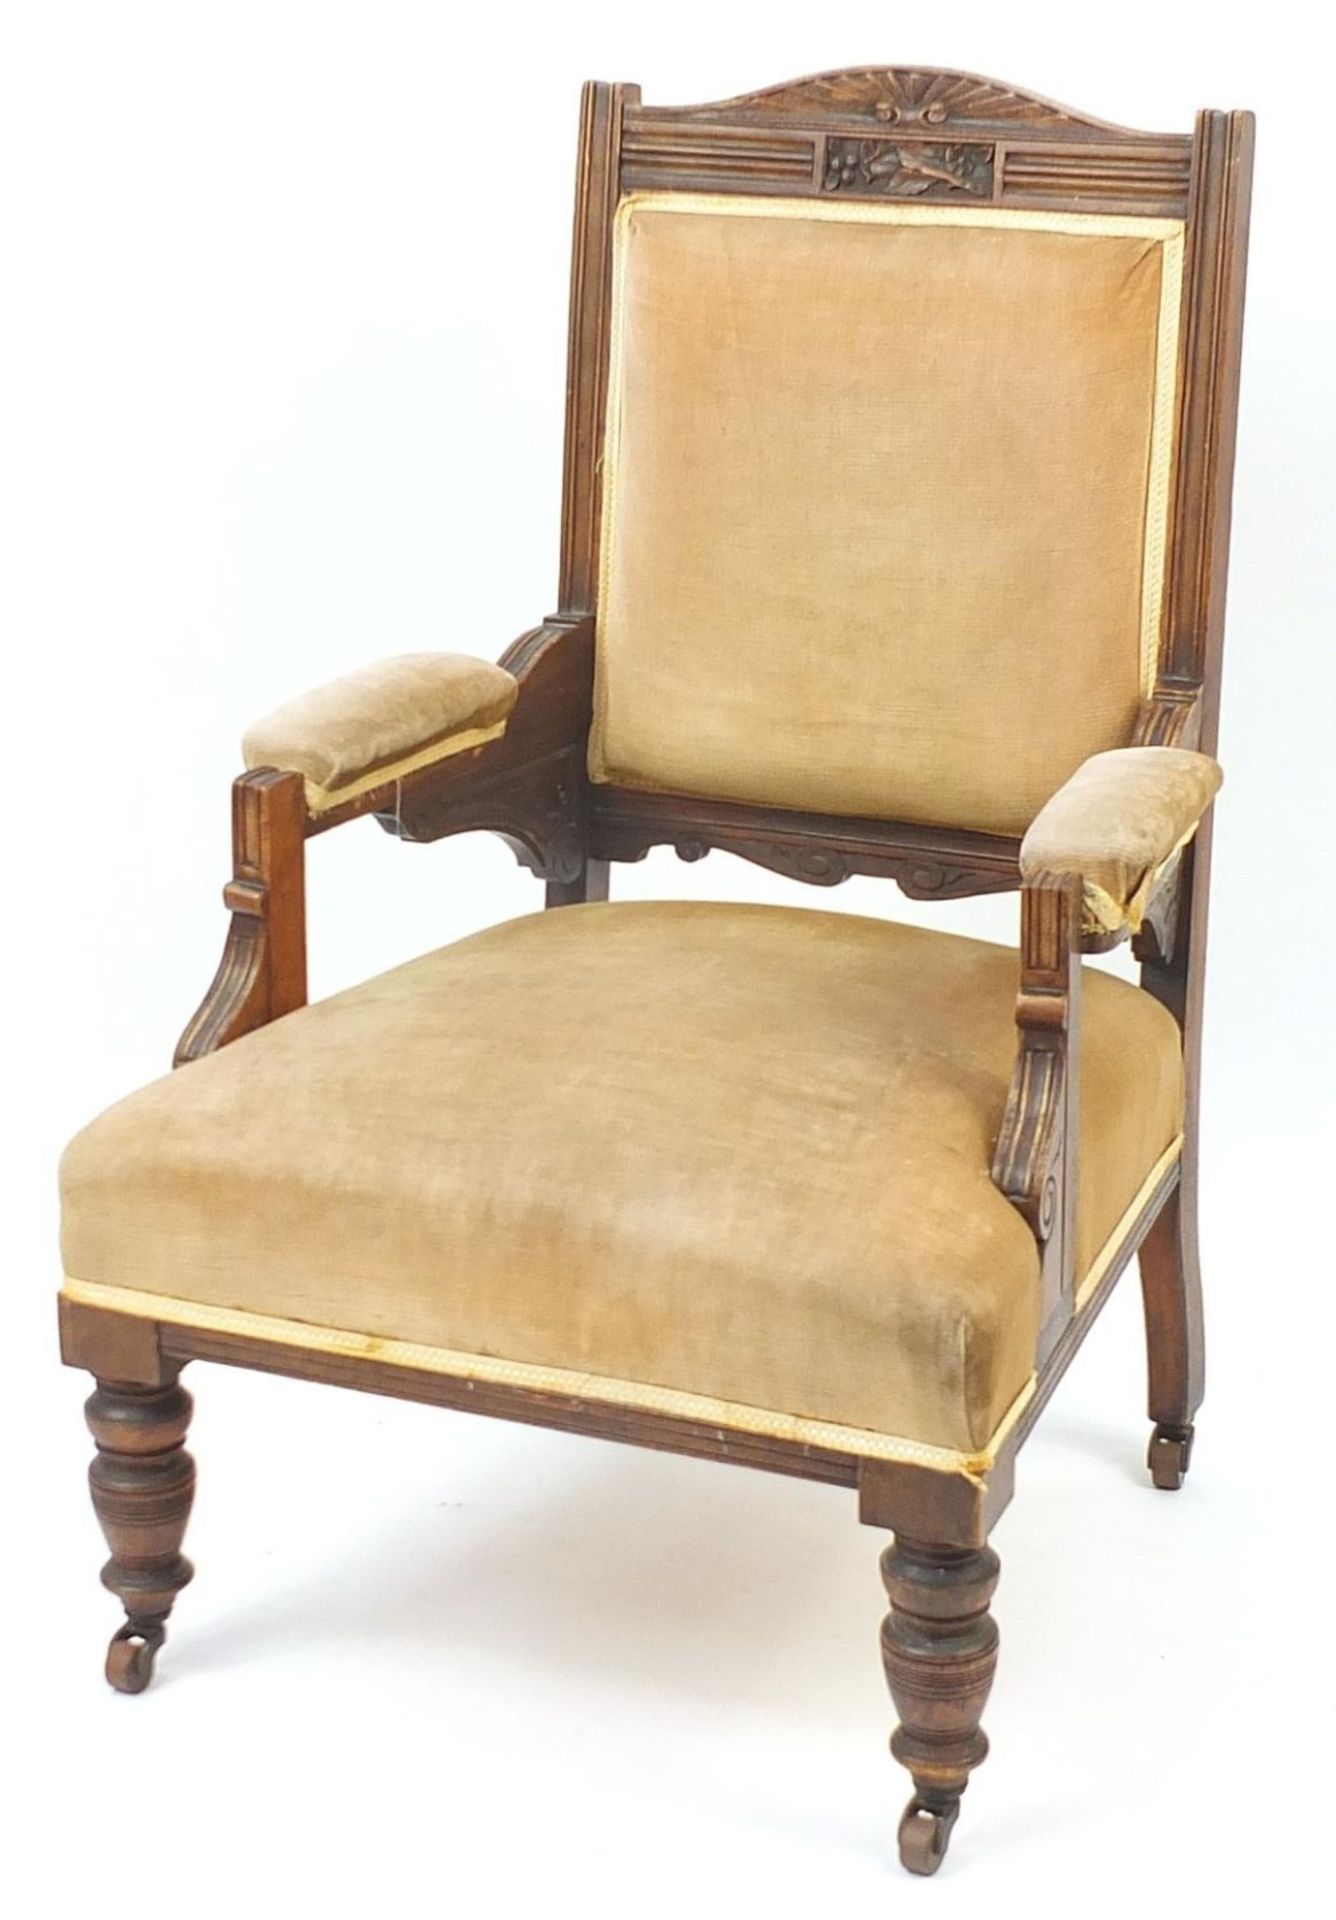 Edwardian carved walnut open elbow chair with beige upholstery, 100cm high :For Further Condition